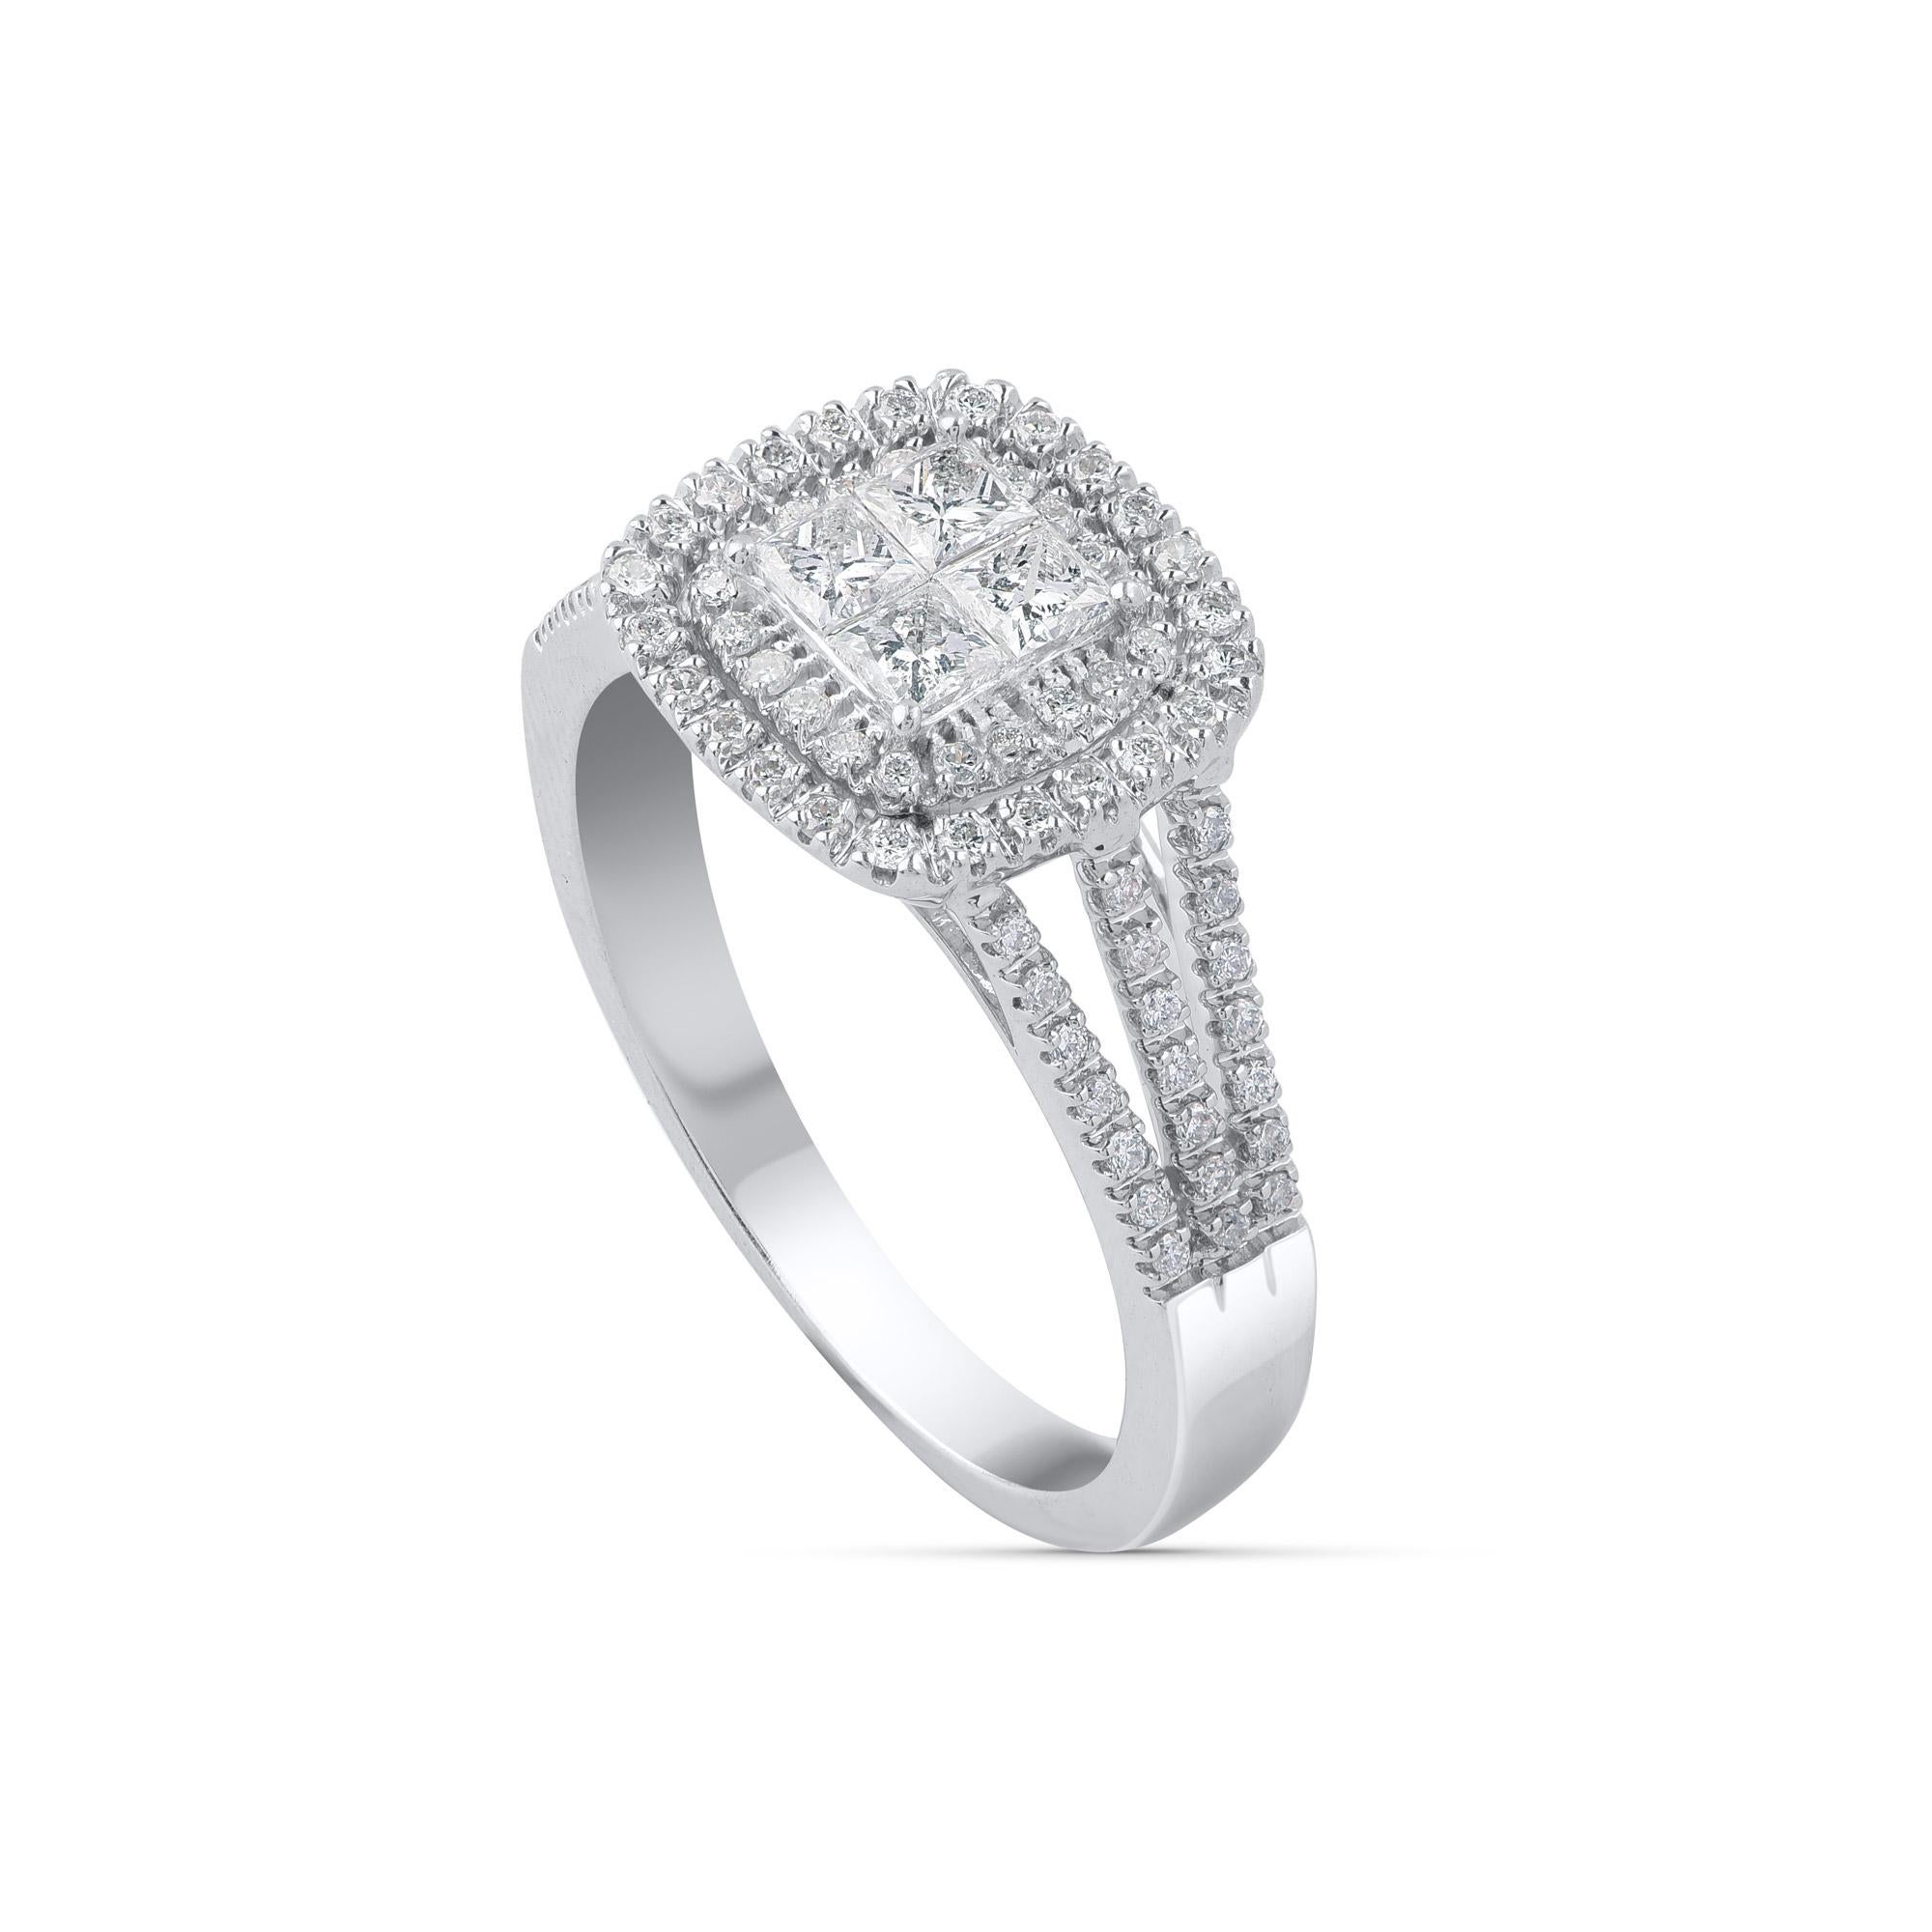 Hand-crafted by our in-house experts in 10 kt white gold and studded with 86 round-cut and 4 princess-cut diamond set beautifully in micro-prong and invisible setting H-I Color, I2 Clarity. Ring size is US size 7.25 and can be resized on request.
